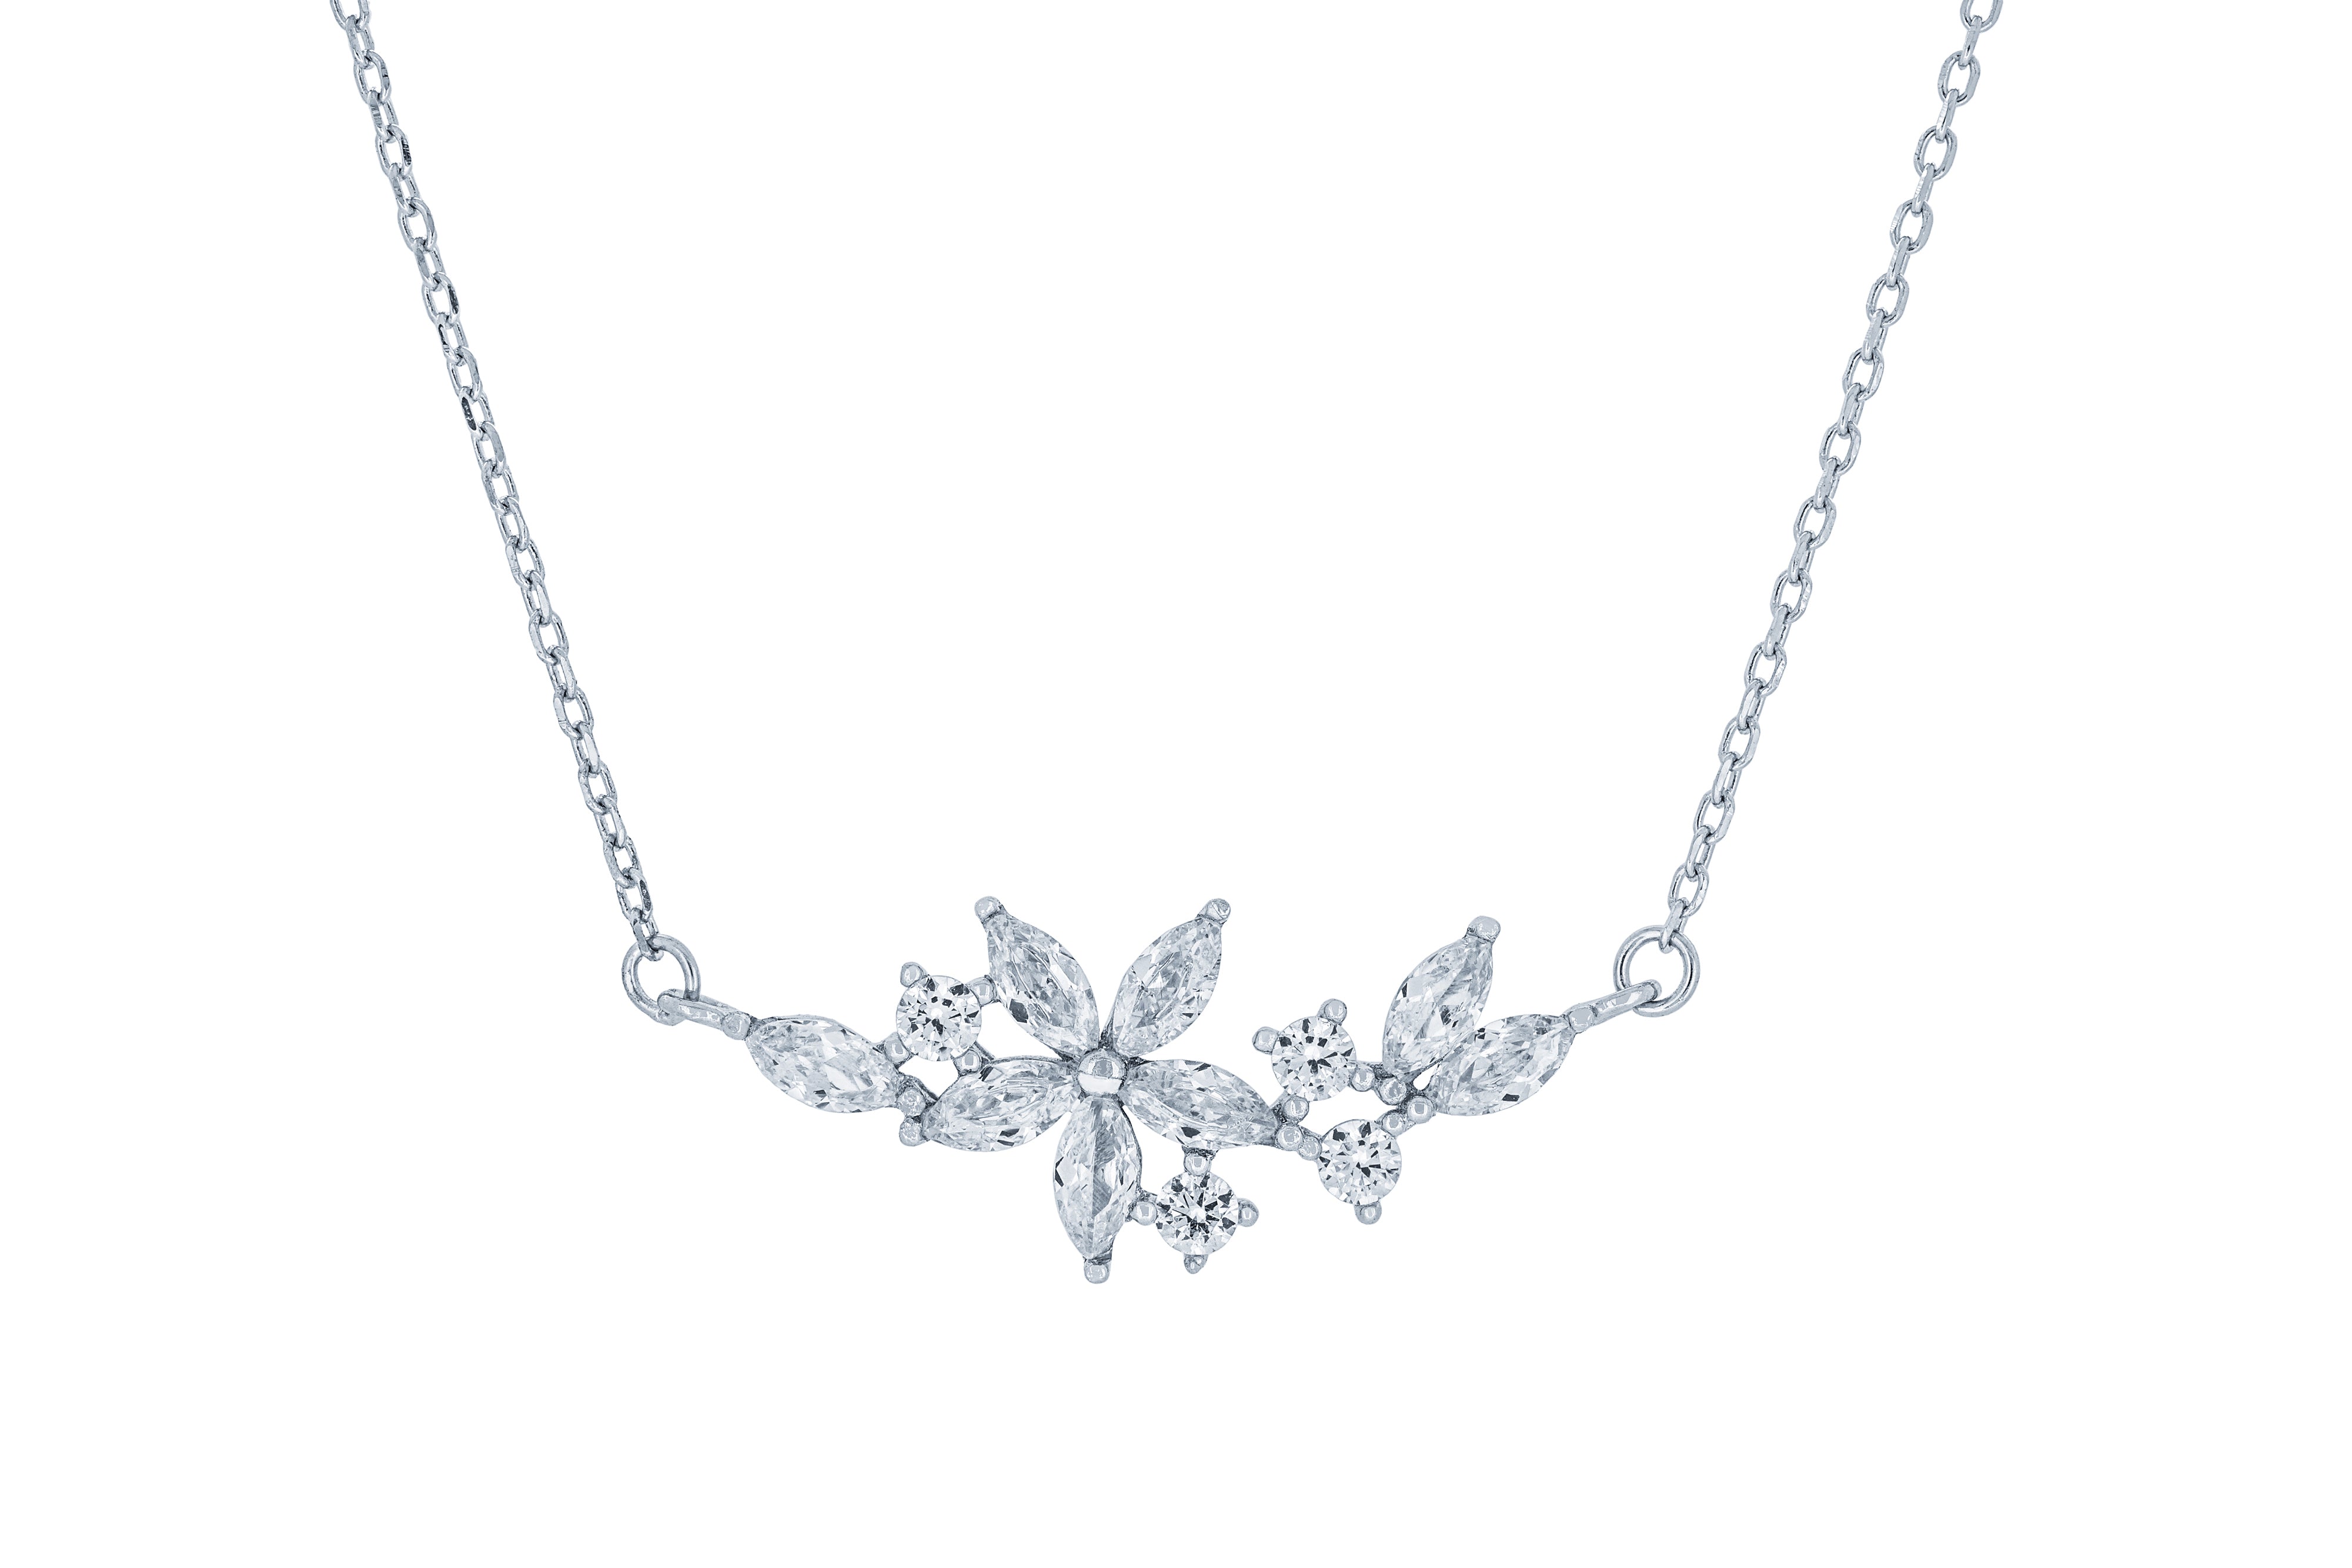 (100166) White Cubic Zirconia Flower Necklace In Sterling Silver